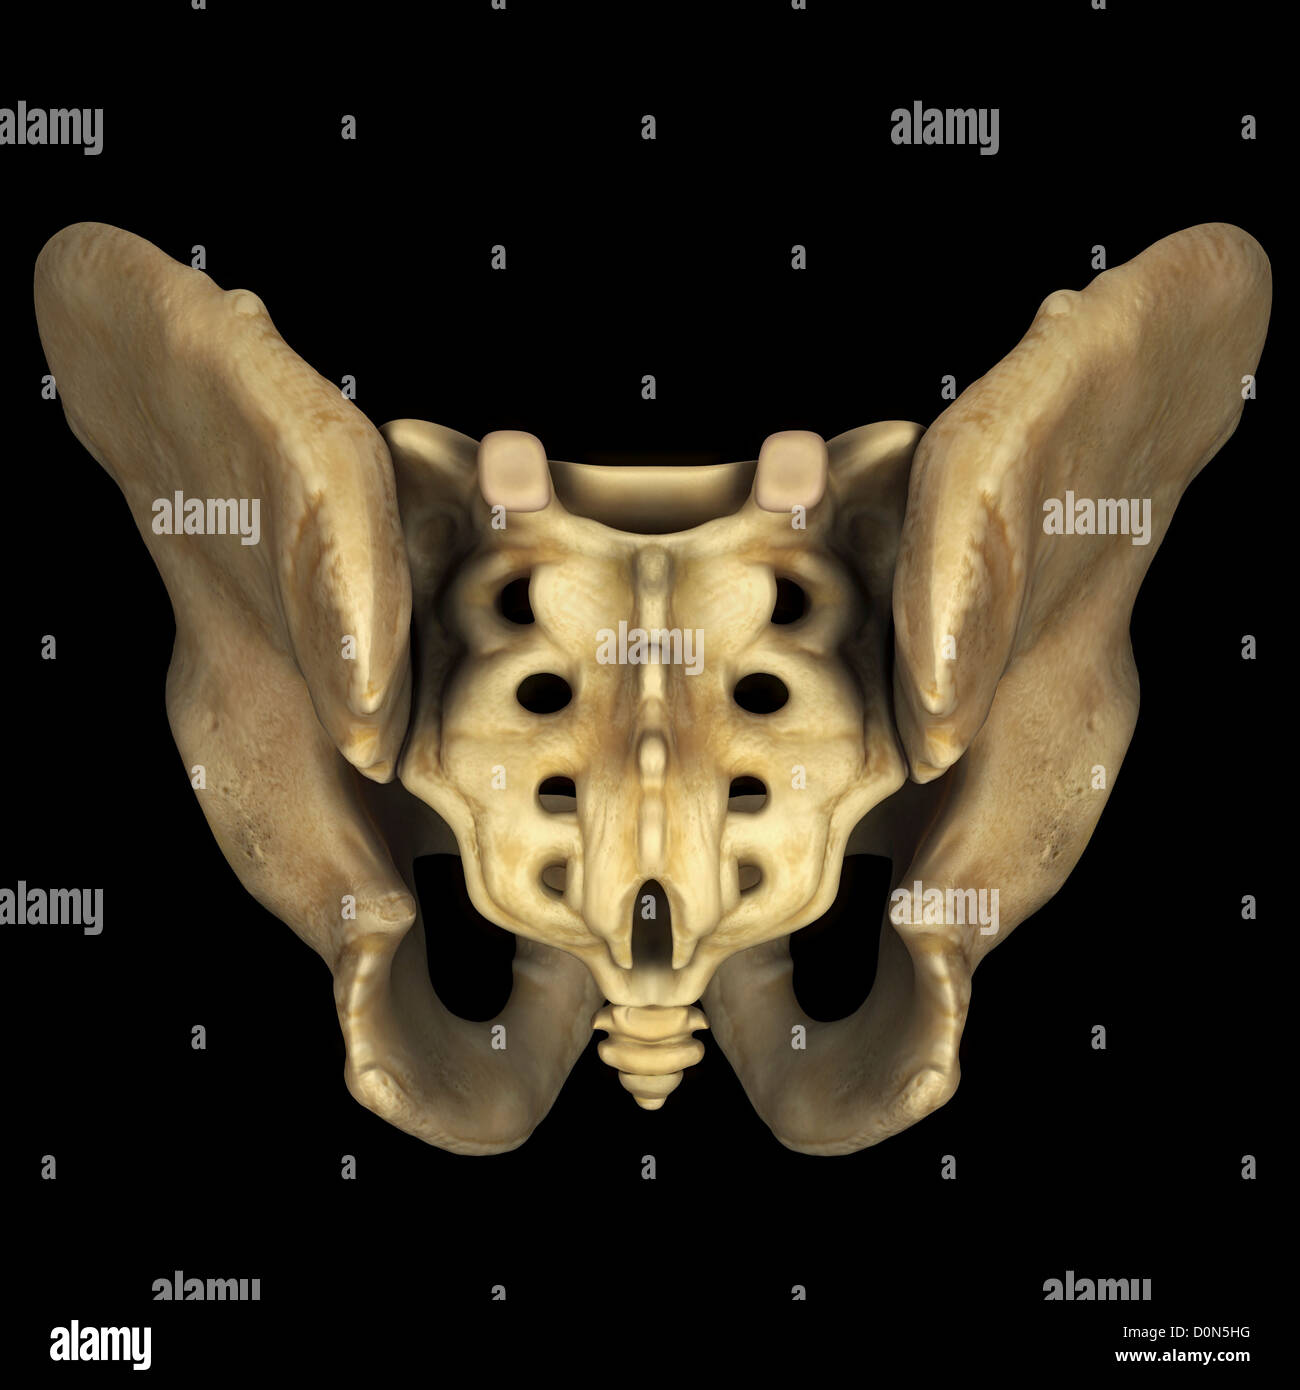 The bones of the male pelvis viewed from a rear perspective. Stock Photo